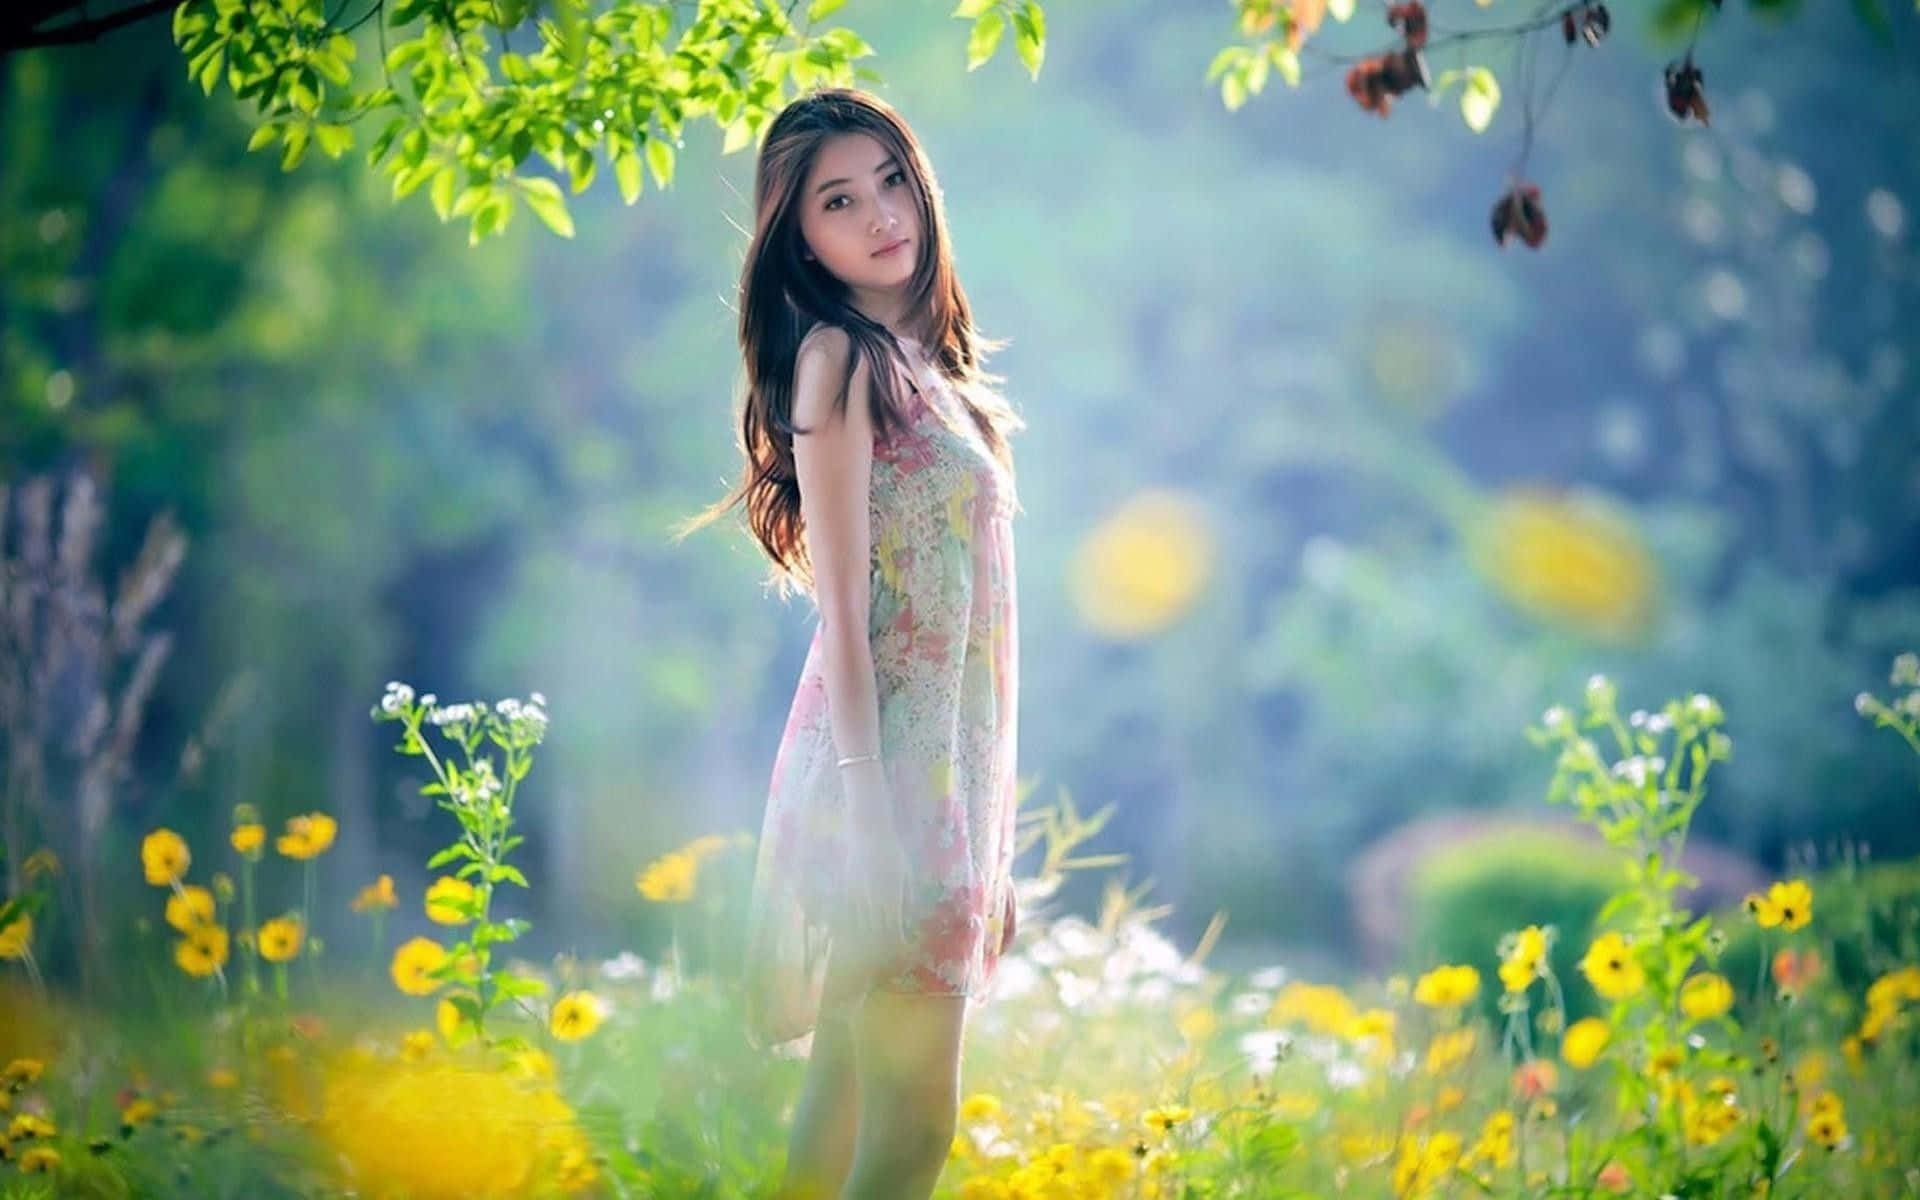 Radiant Beauty Surrounded by Nature